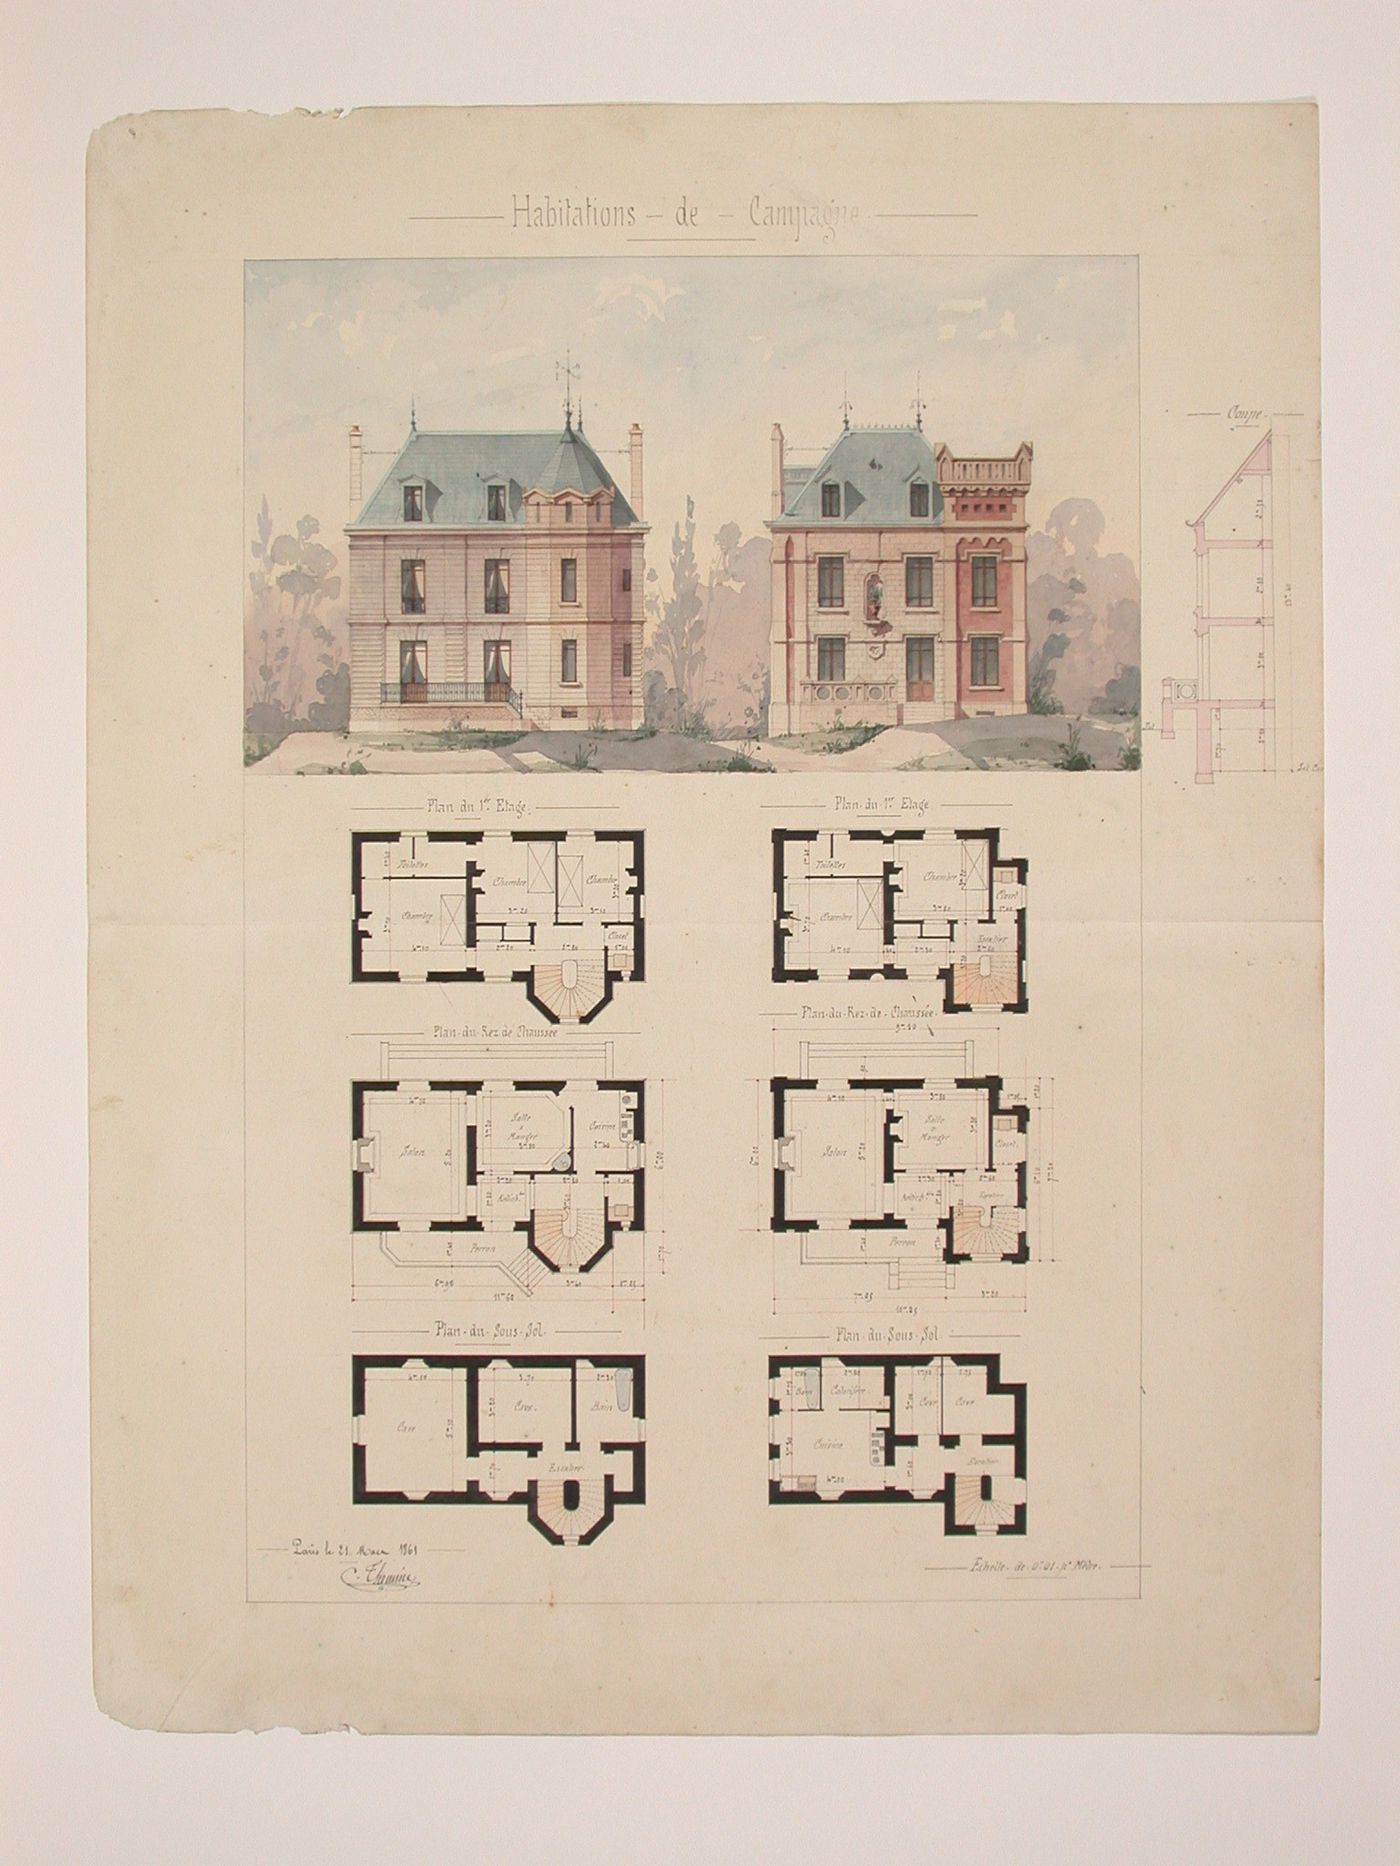 Rendered elevations and plans for a Gothic Revival country house